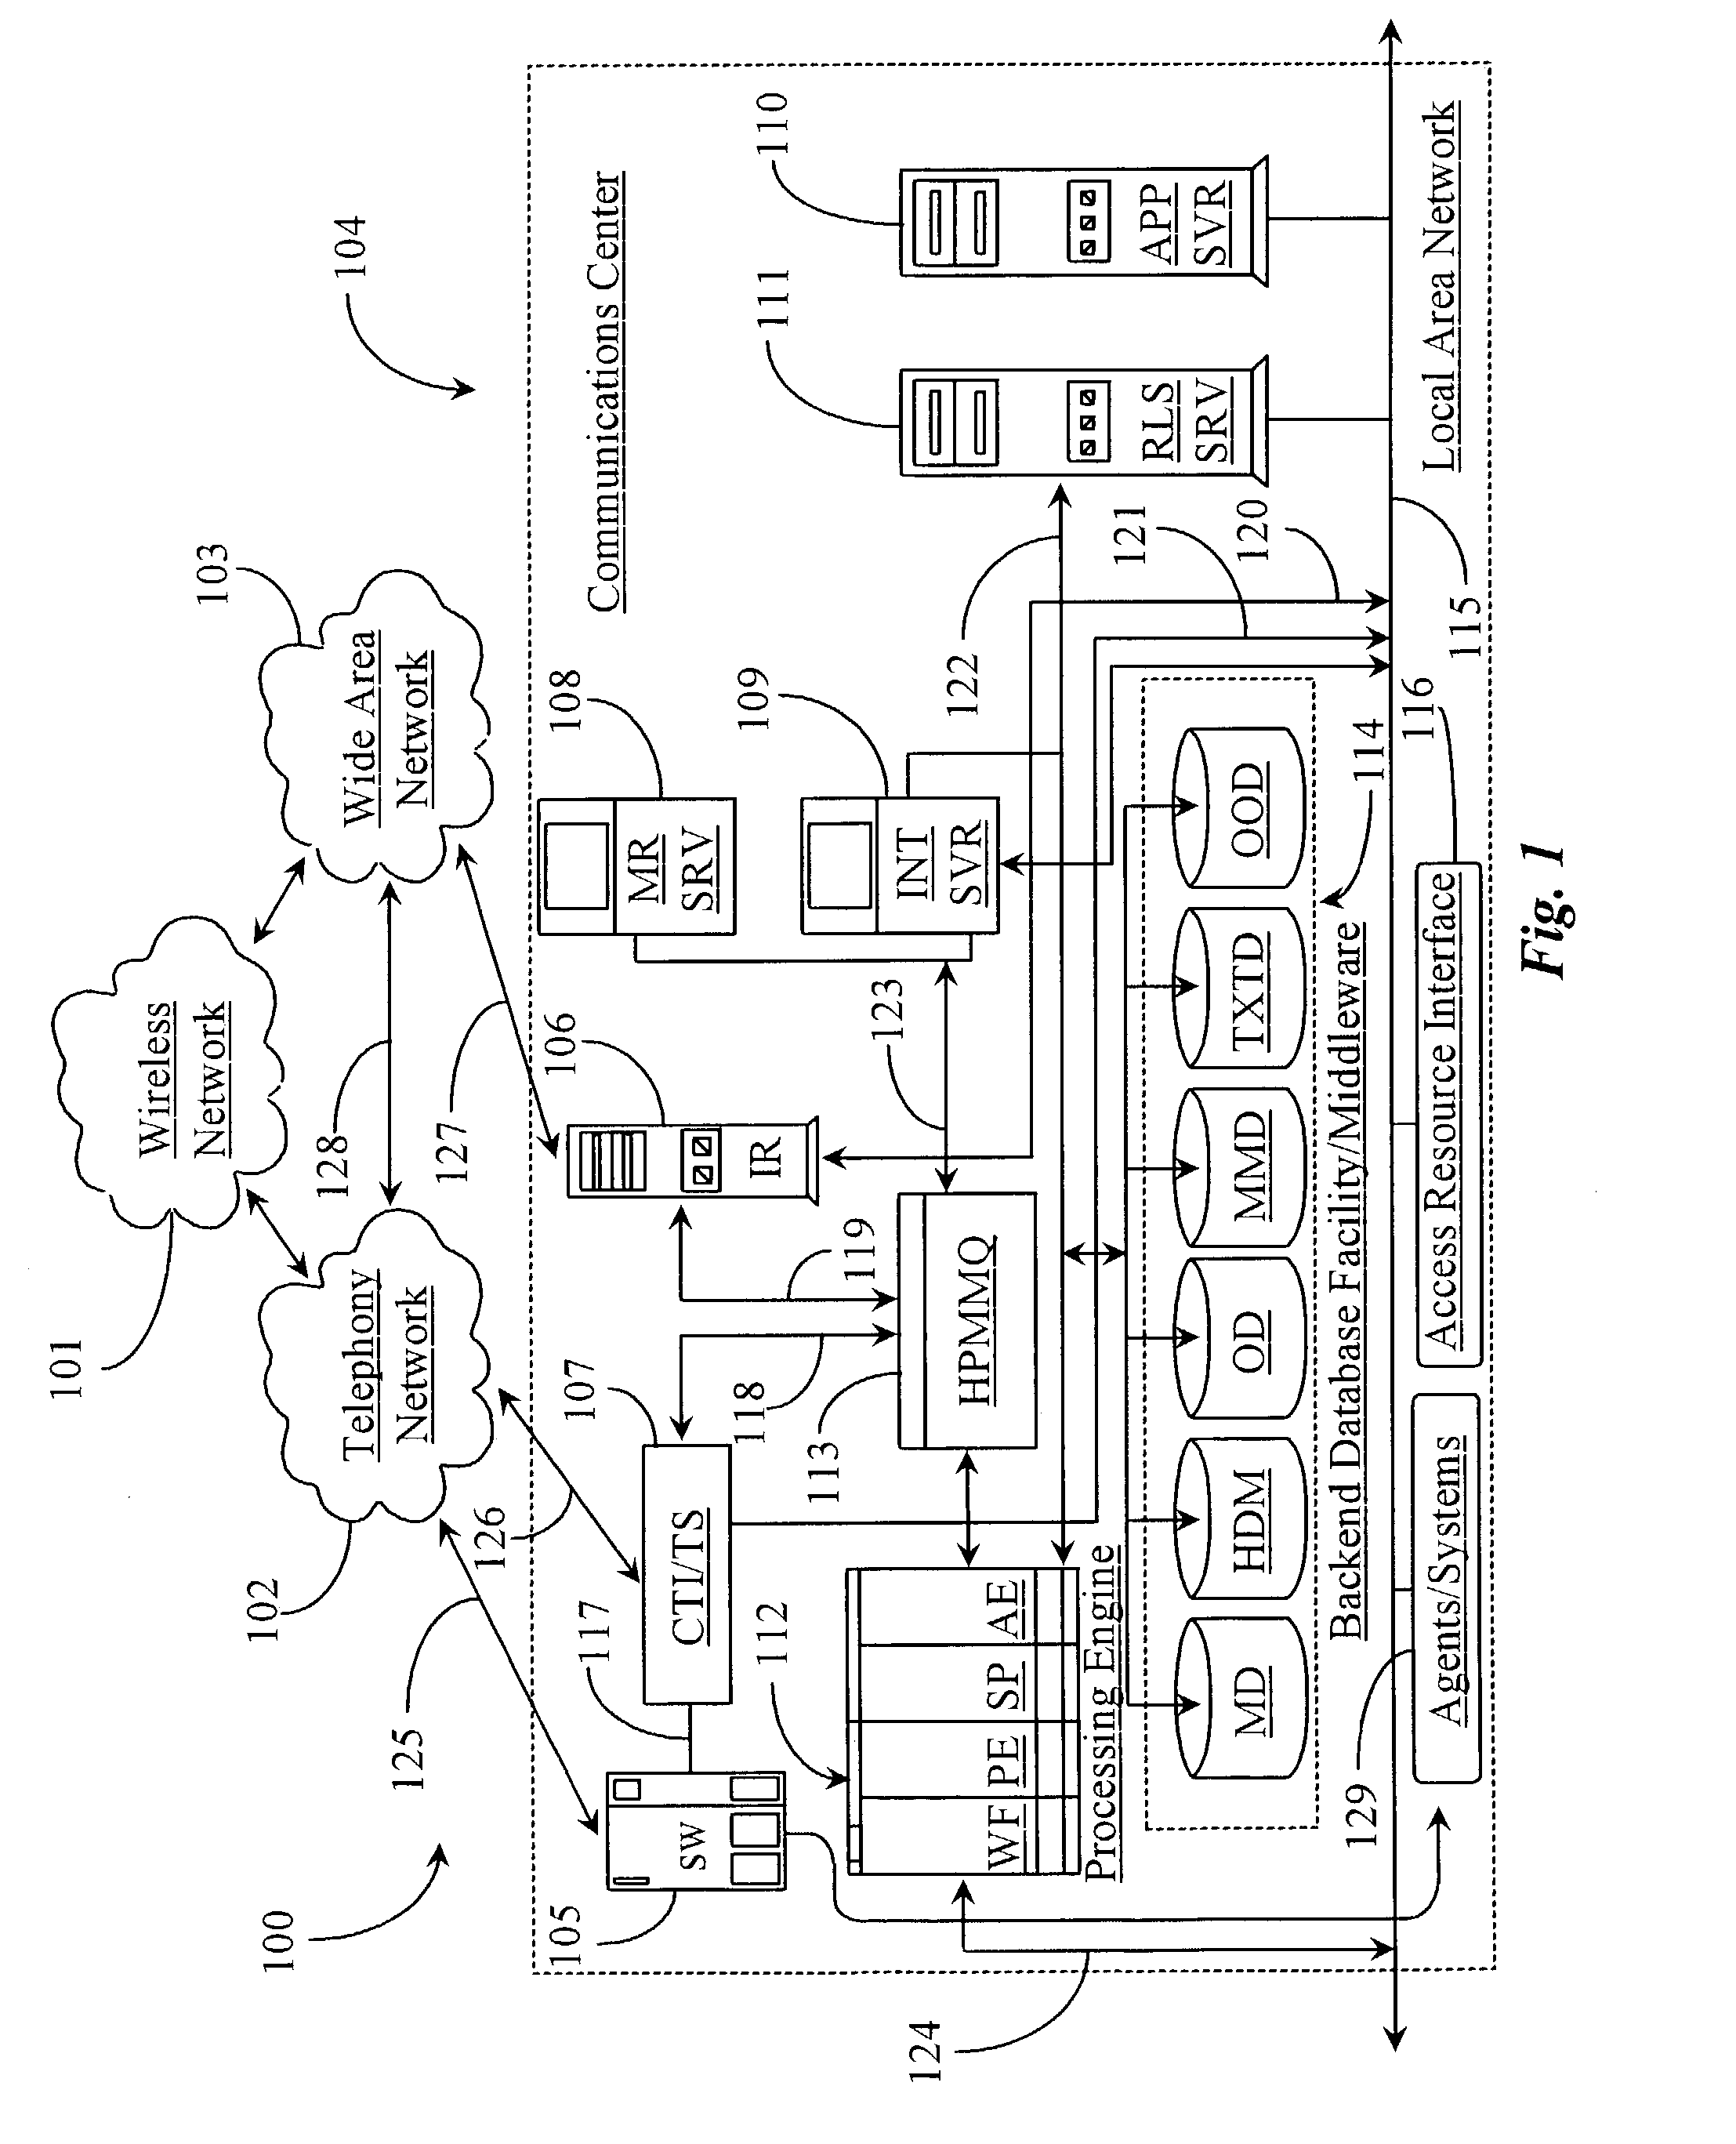 Method and system for providing adaptive and proactive interaction management for multiple types of business interactions occurring in a multimedia communications environment